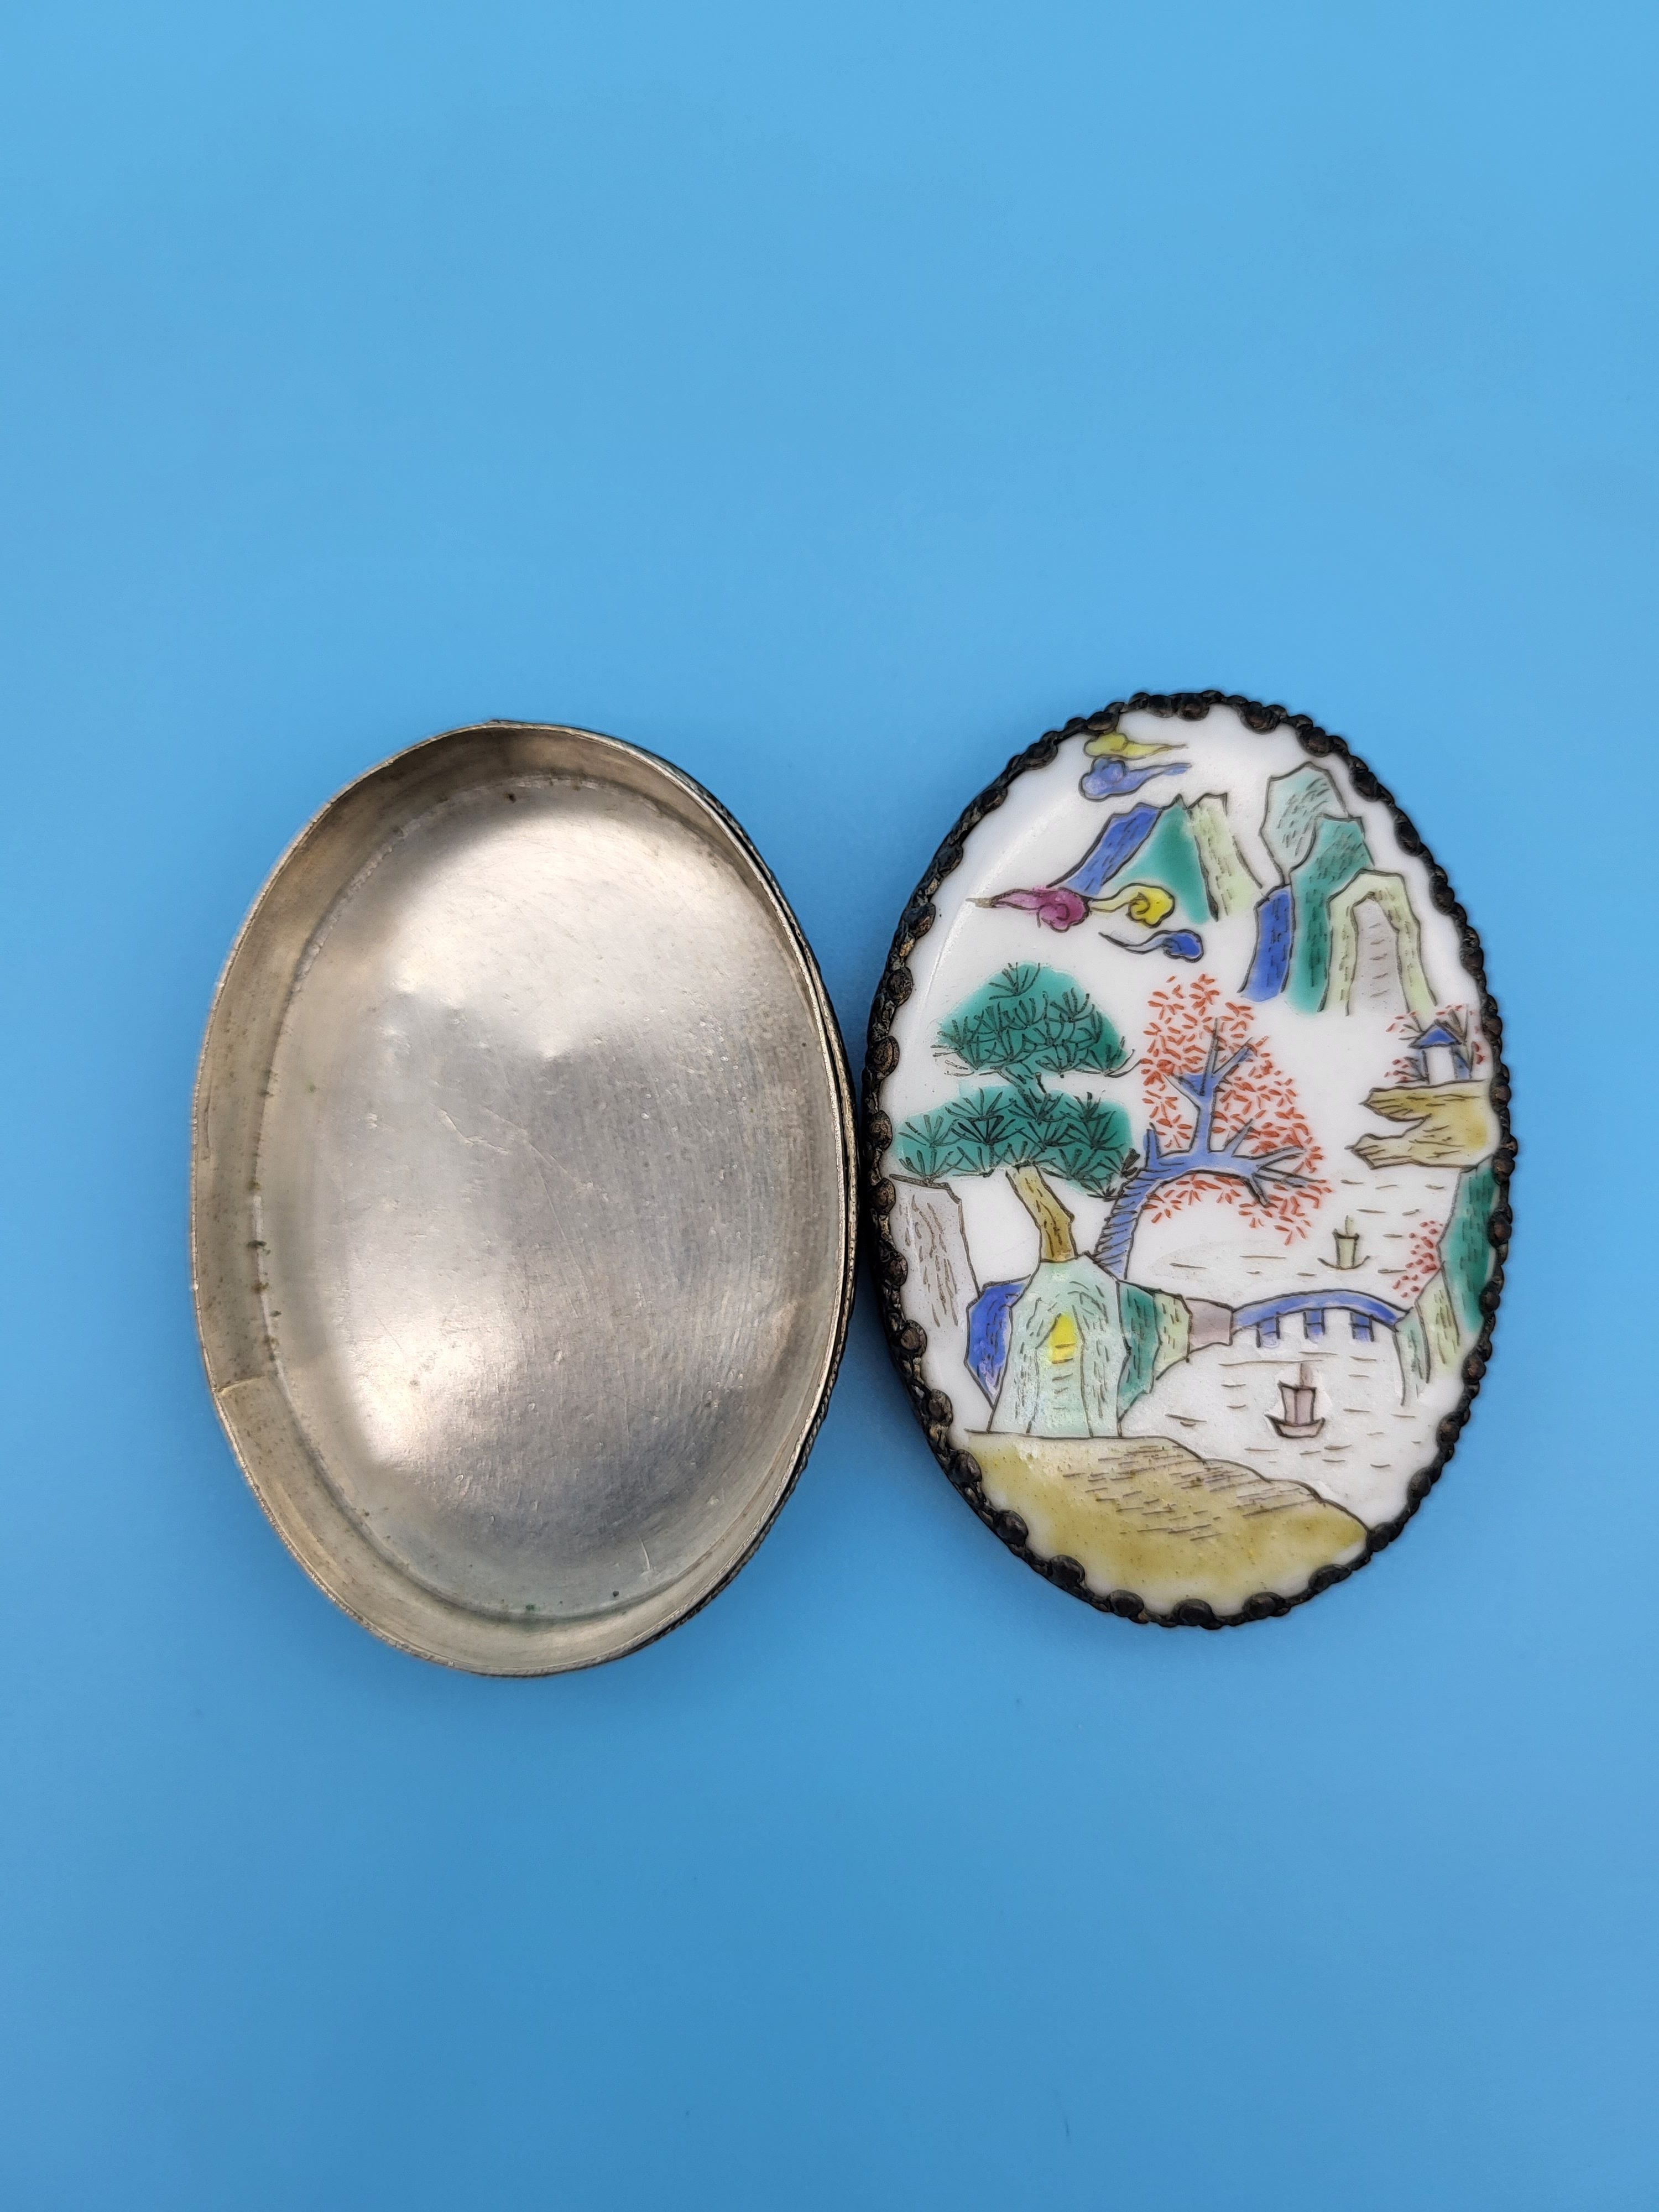 Oval Trinket Box with Mirrored Lid